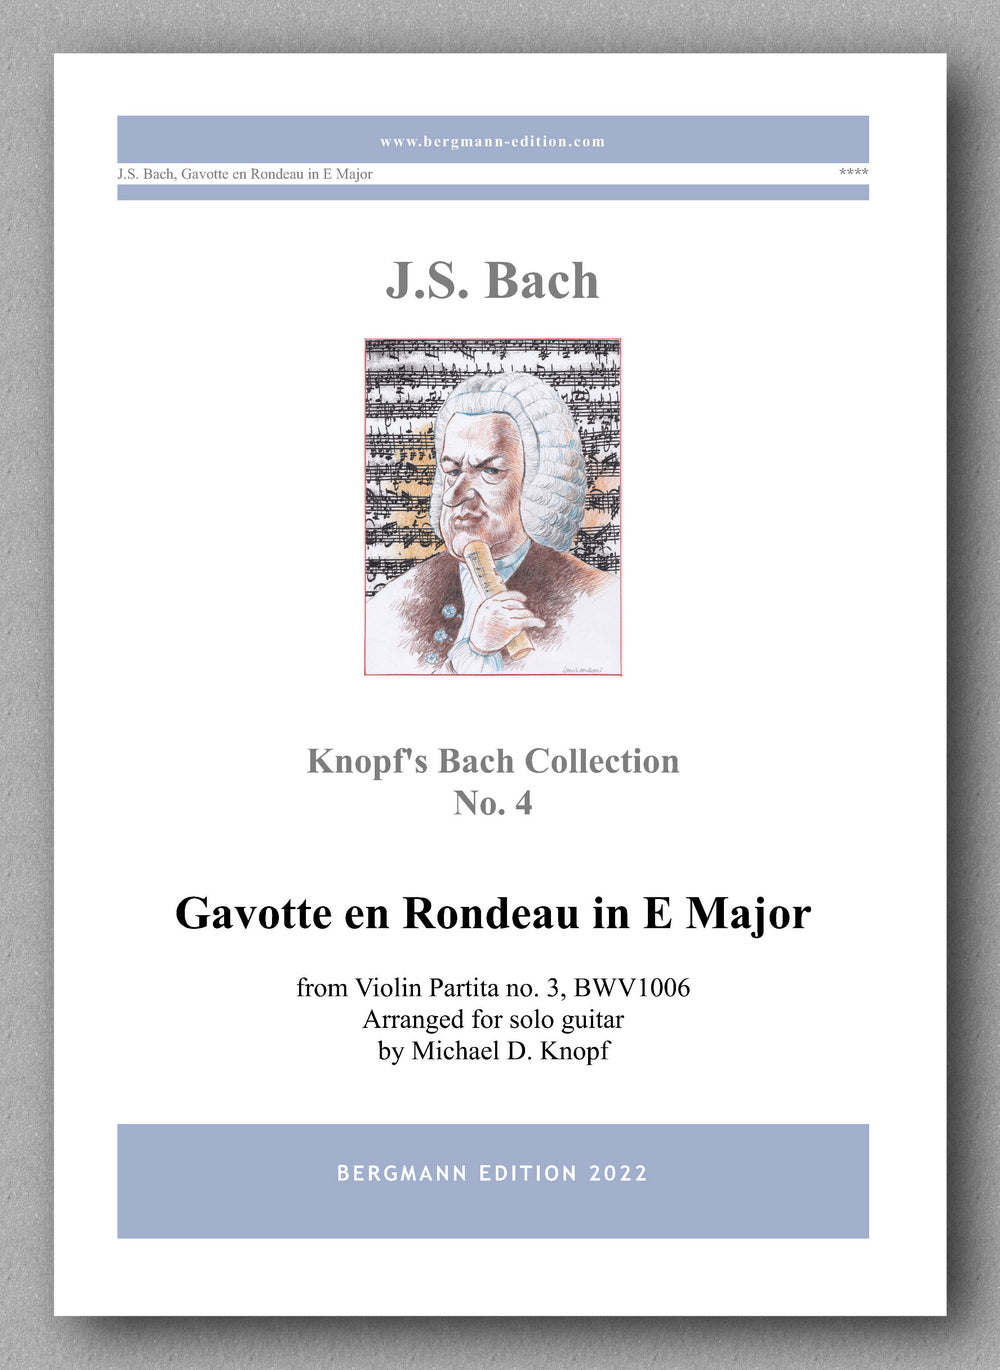 J.S.Bach, Gavotte en Rondeau in E Major, BWV 1006 - preview of the cover